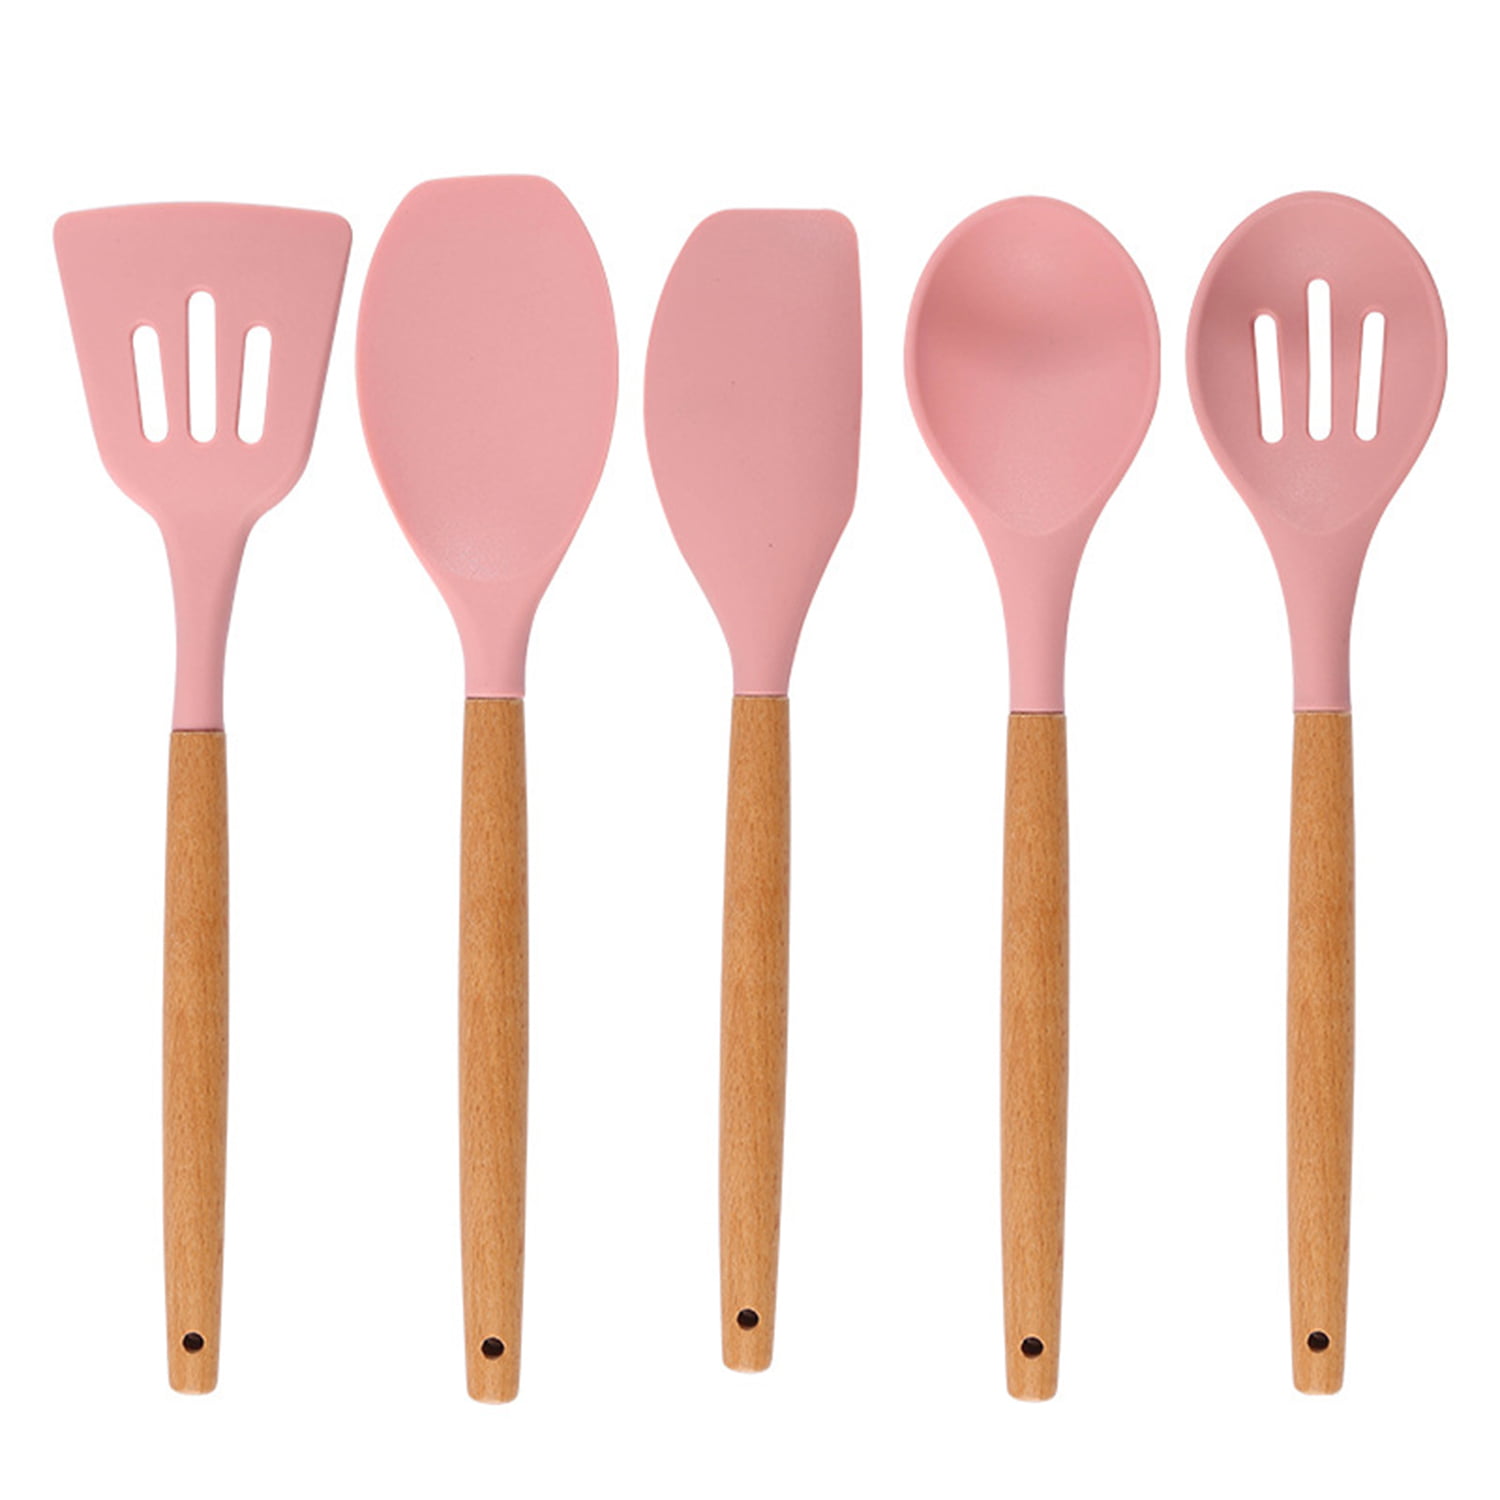 Details about   Silicone Utensil Mixing Spoon Non-Scratch Spatula Cooker New Heat Resistant P9L4 